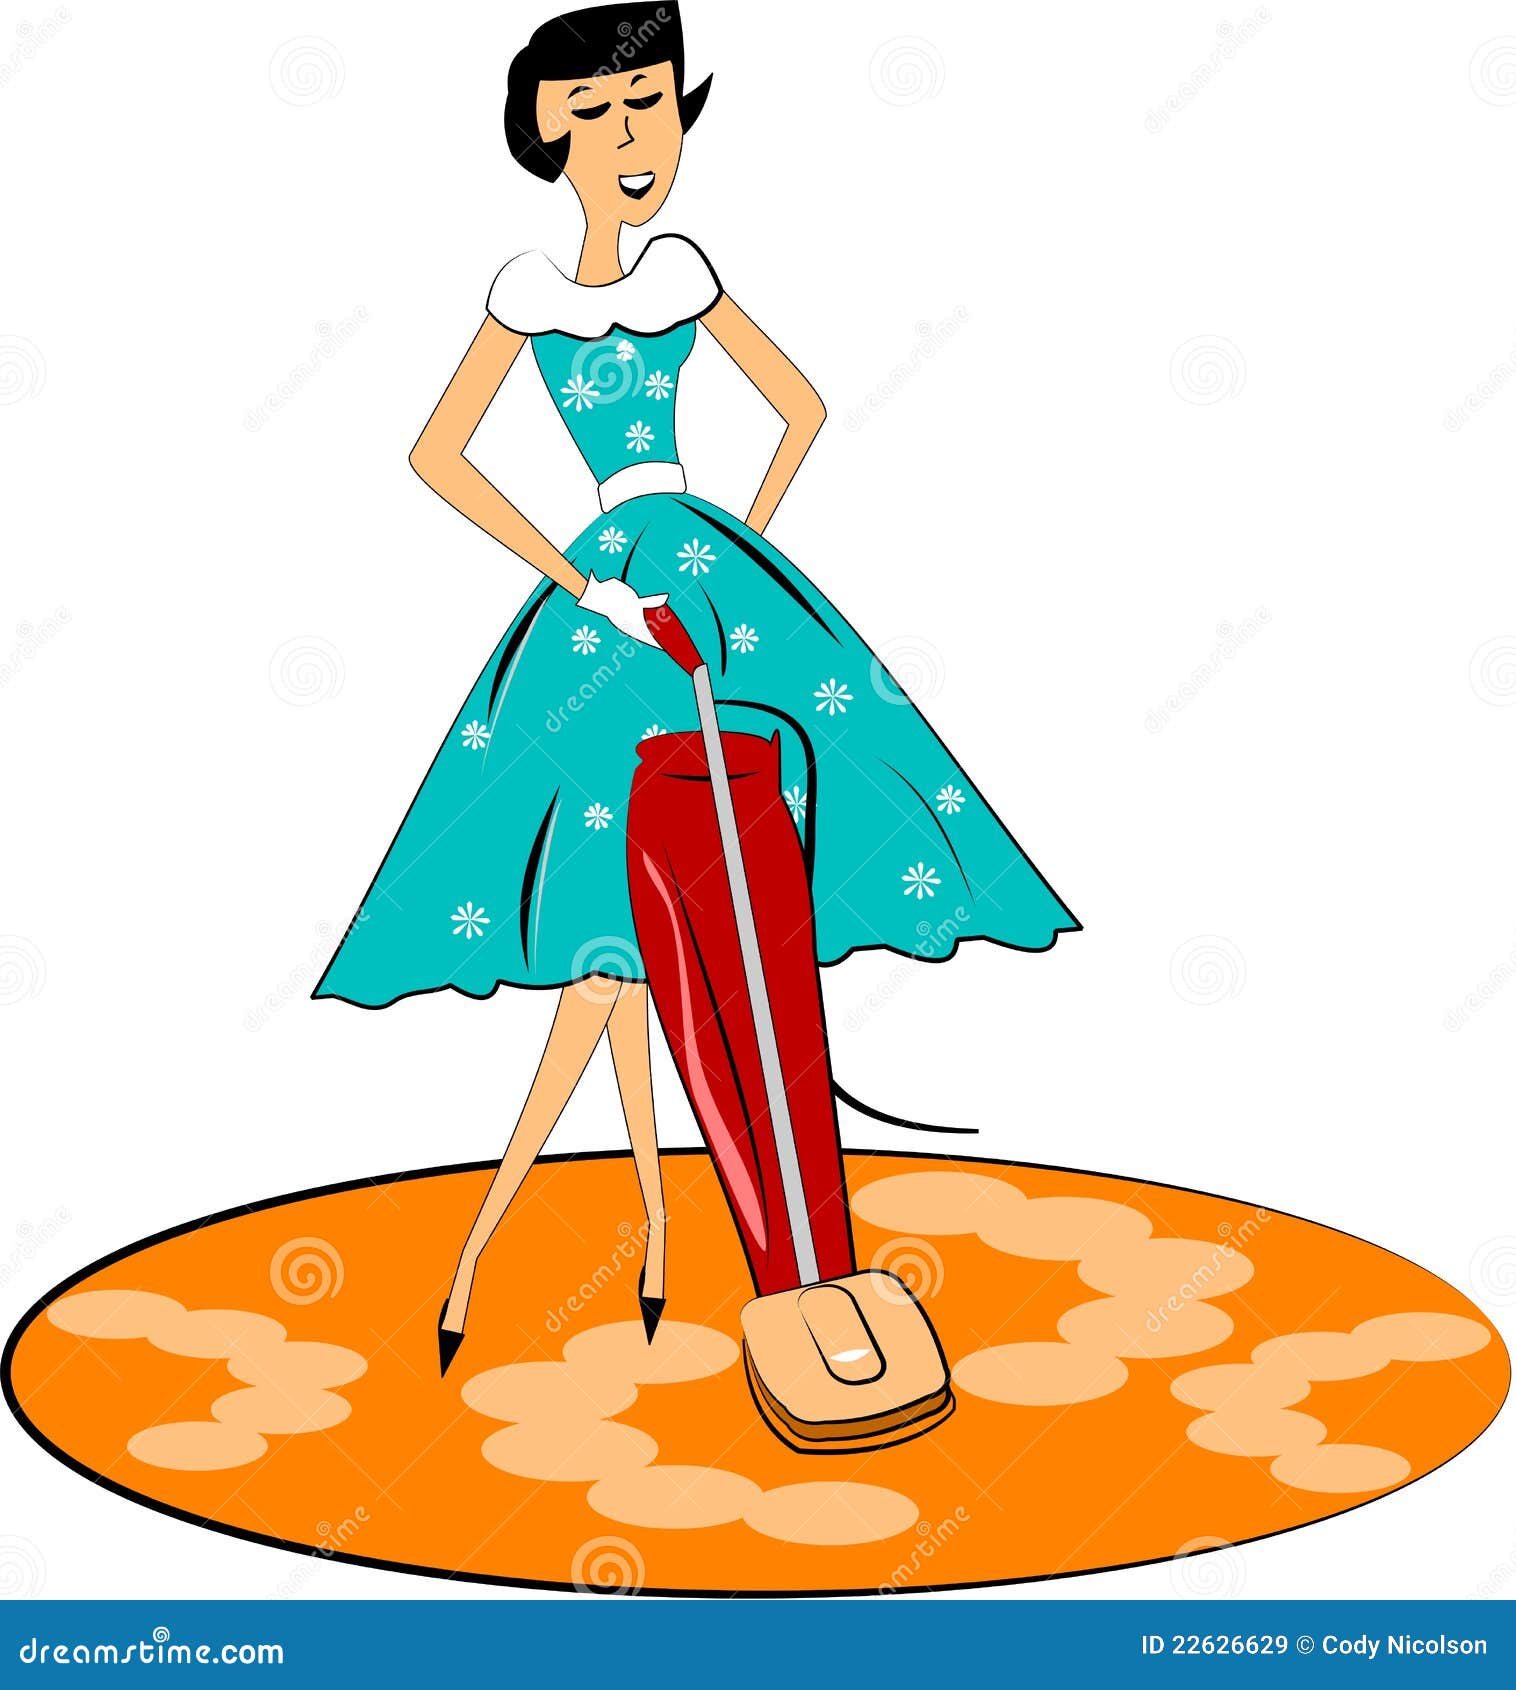 mother cleaning clipart - photo #11